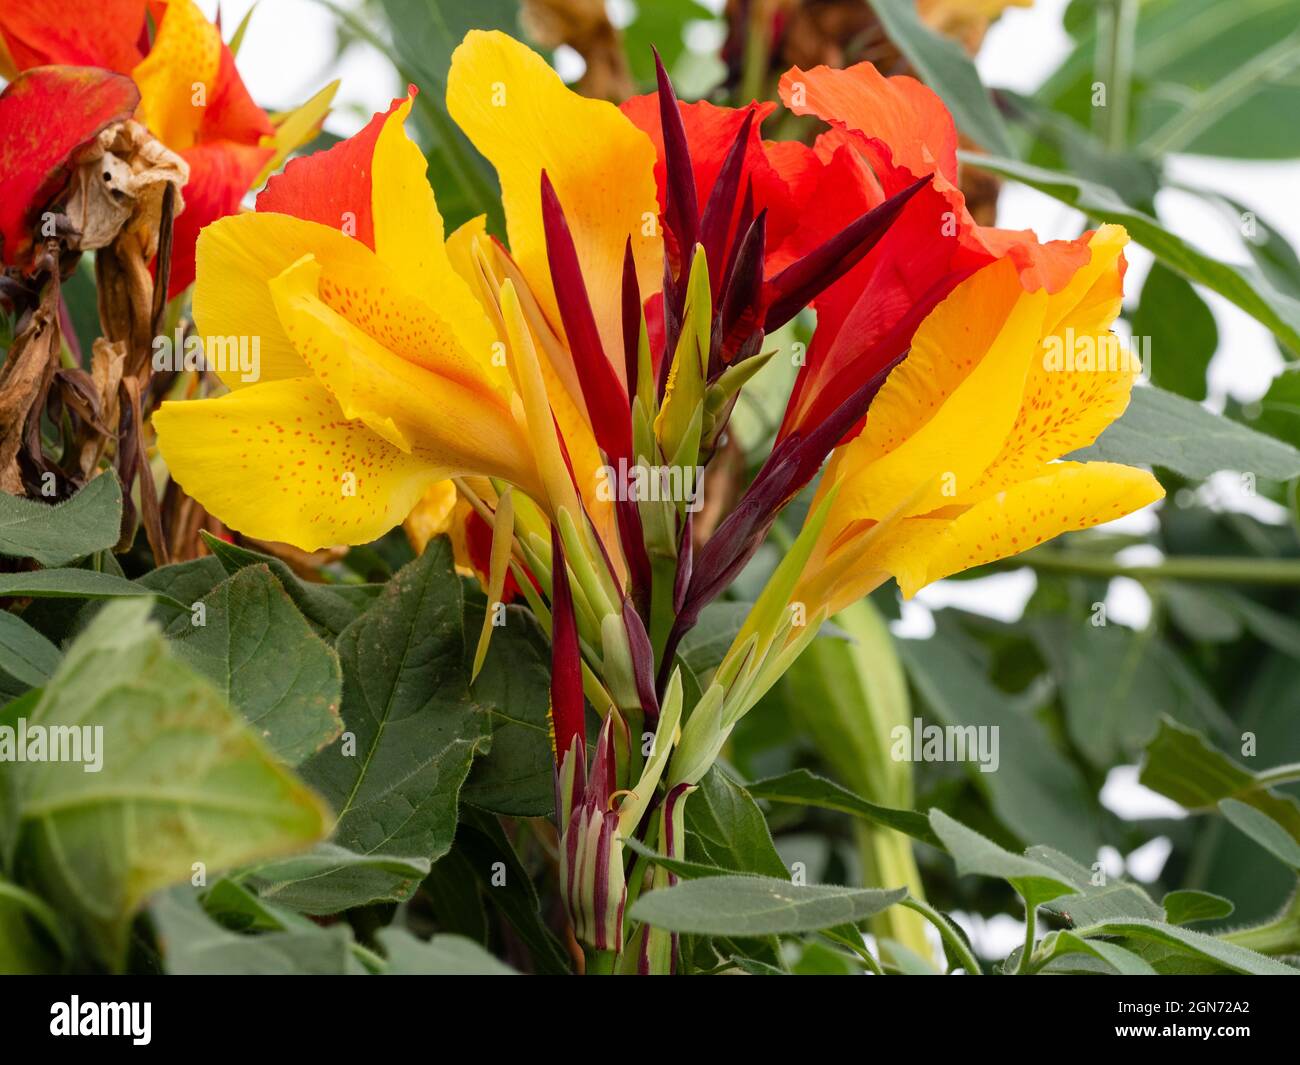 Mixed red and yellow flowers in the head of the unstable chimeral Canna 'Cleopatra' Stock Photo